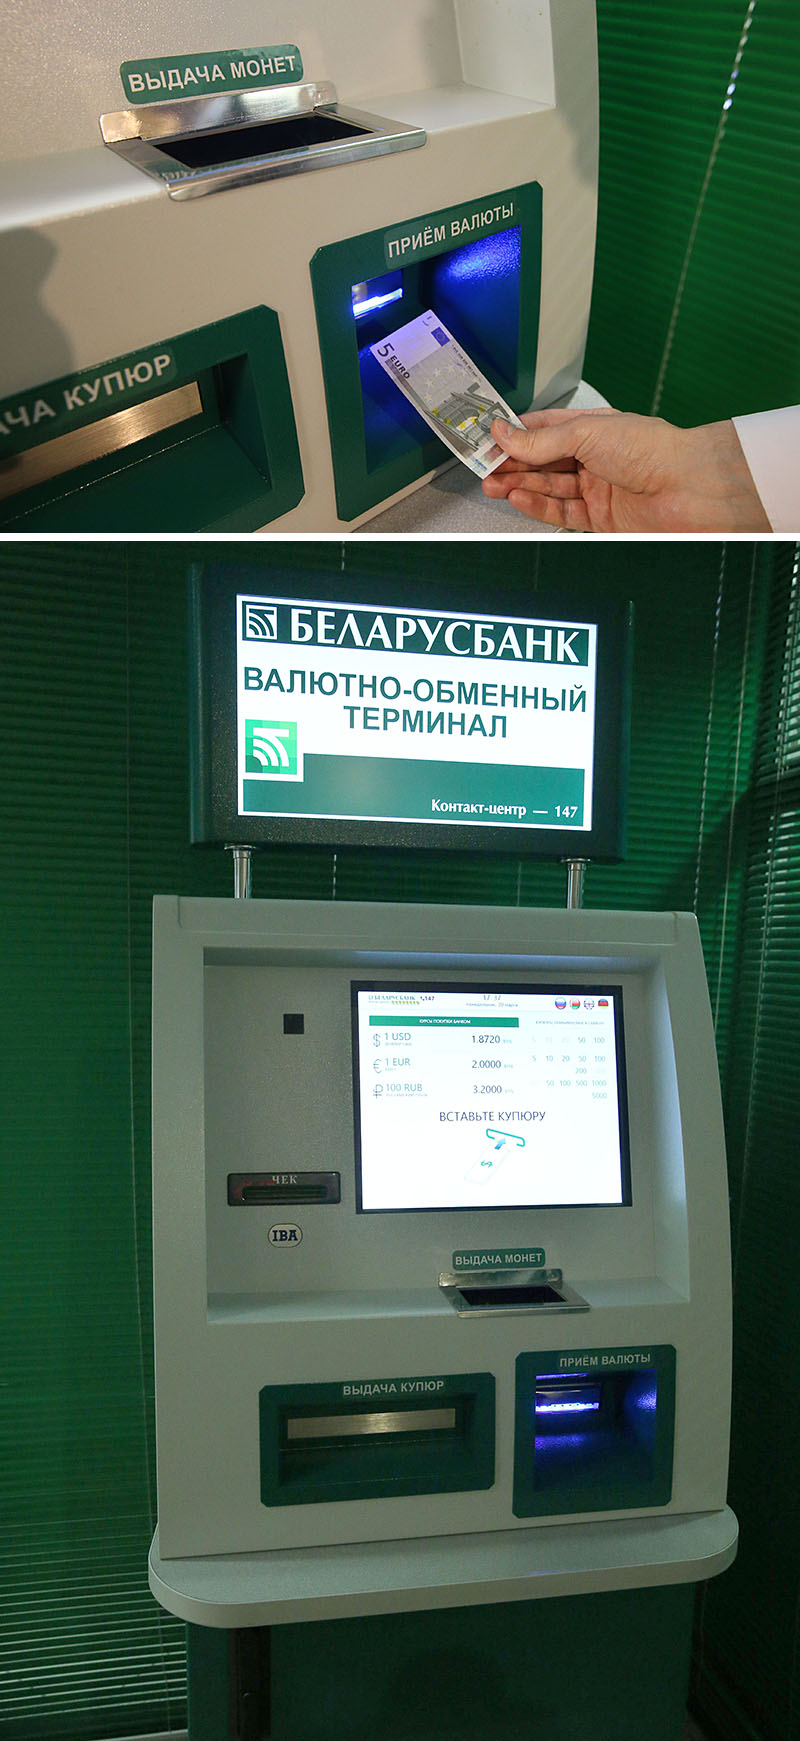 Currency exchange machine that gives both banknotes and coins